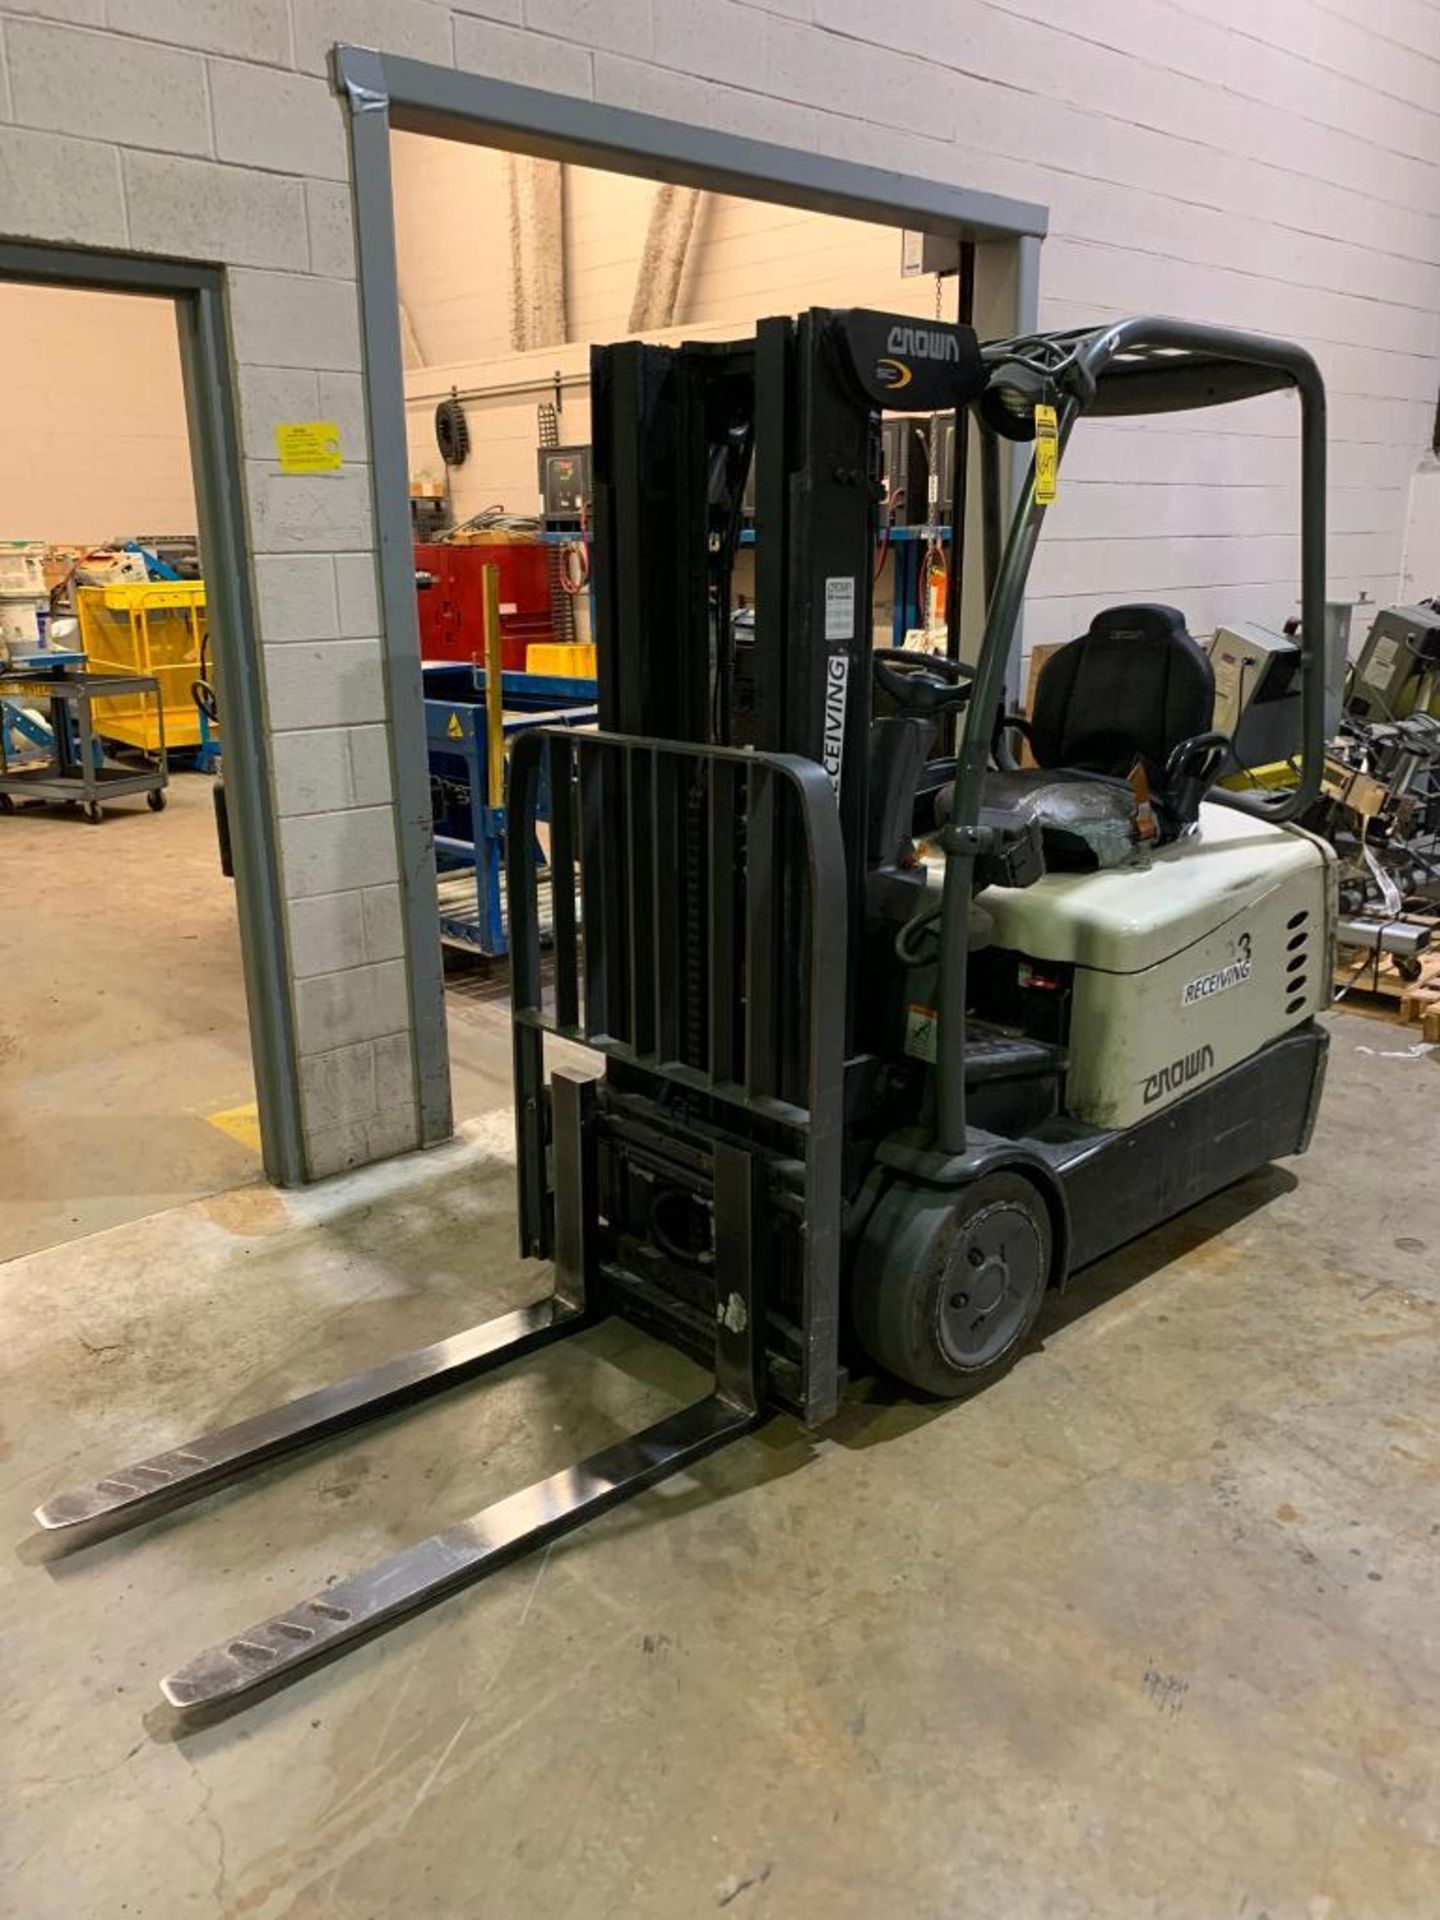 Crown 3,000 LB. Capacity Electric Forklift, Model SC5225-30, 36V, 3-Stage Mast, 172" Max. Load Heigh - Image 2 of 7